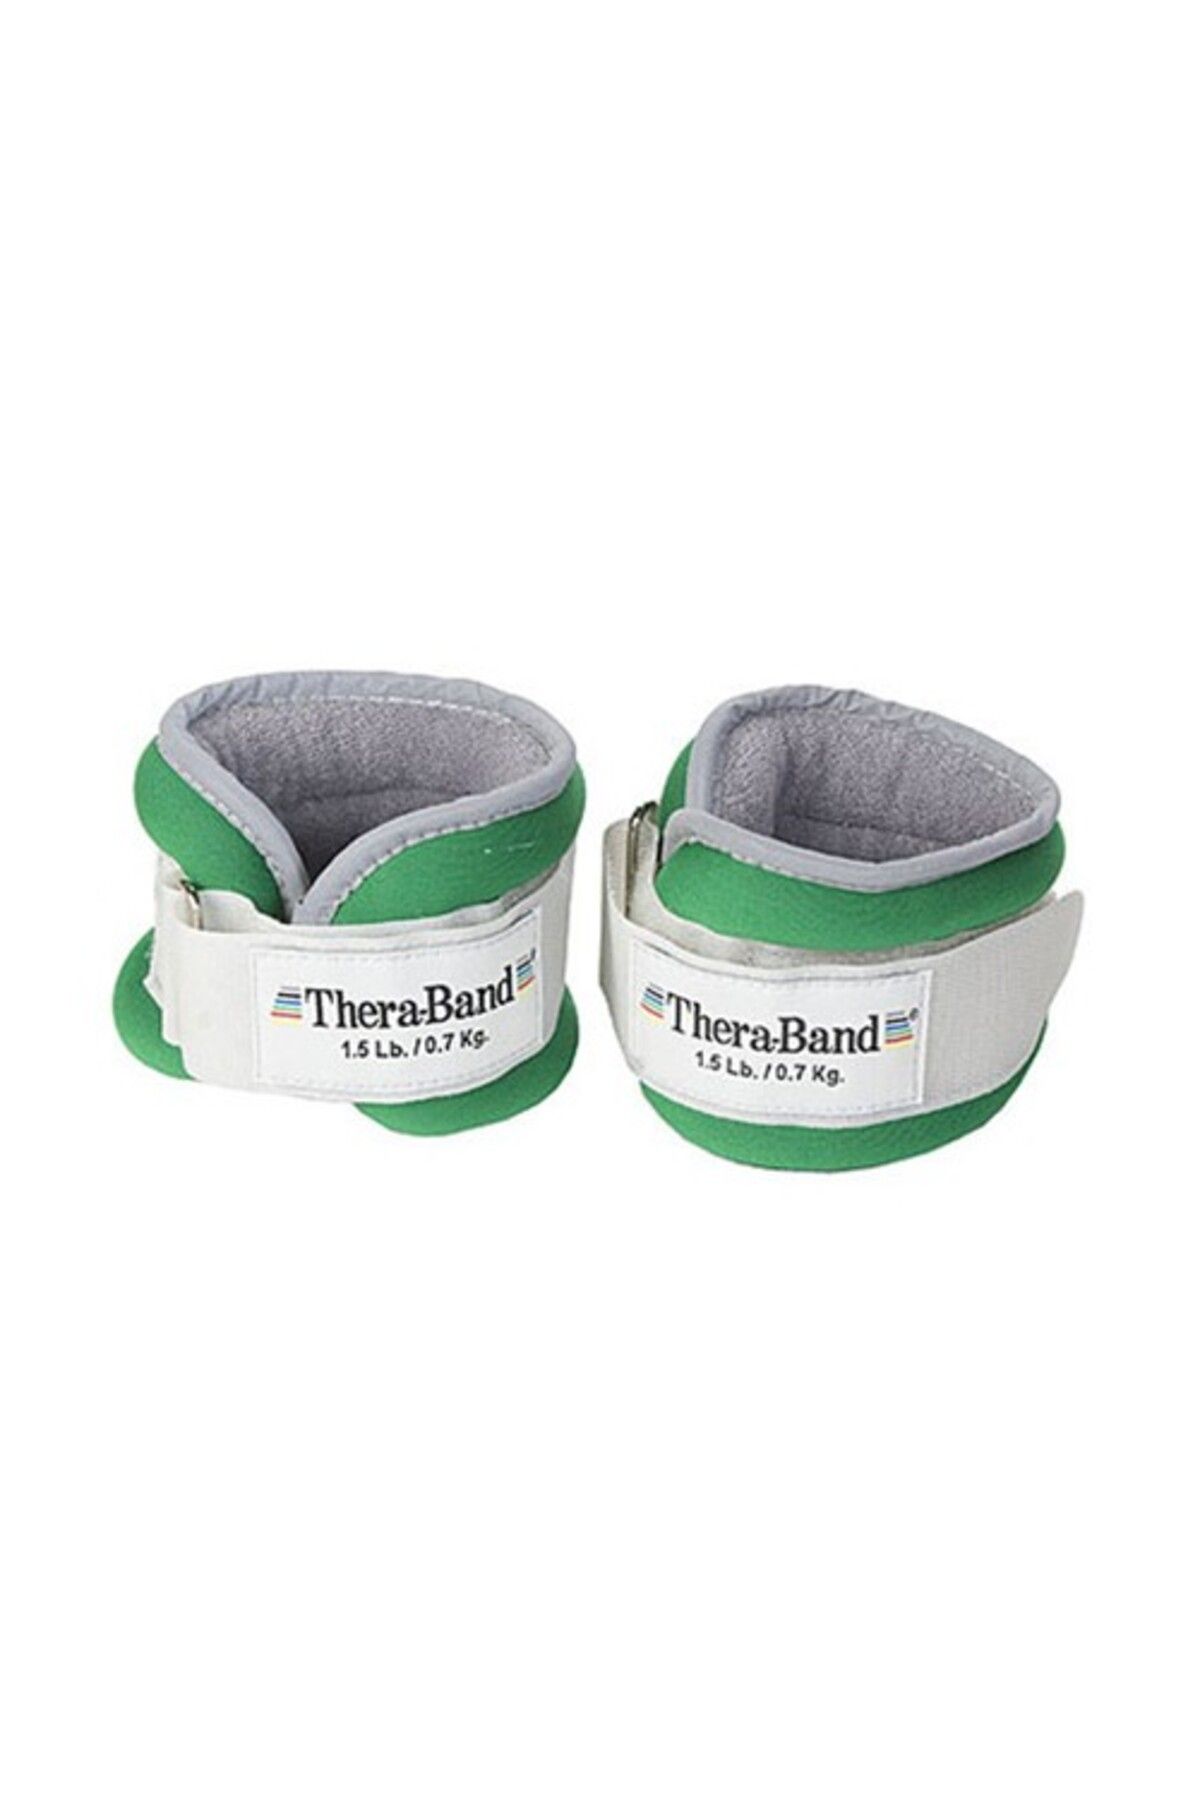 Theraband ® Ankle Wrist Weight Sets 0,7 Kg / Yeşil